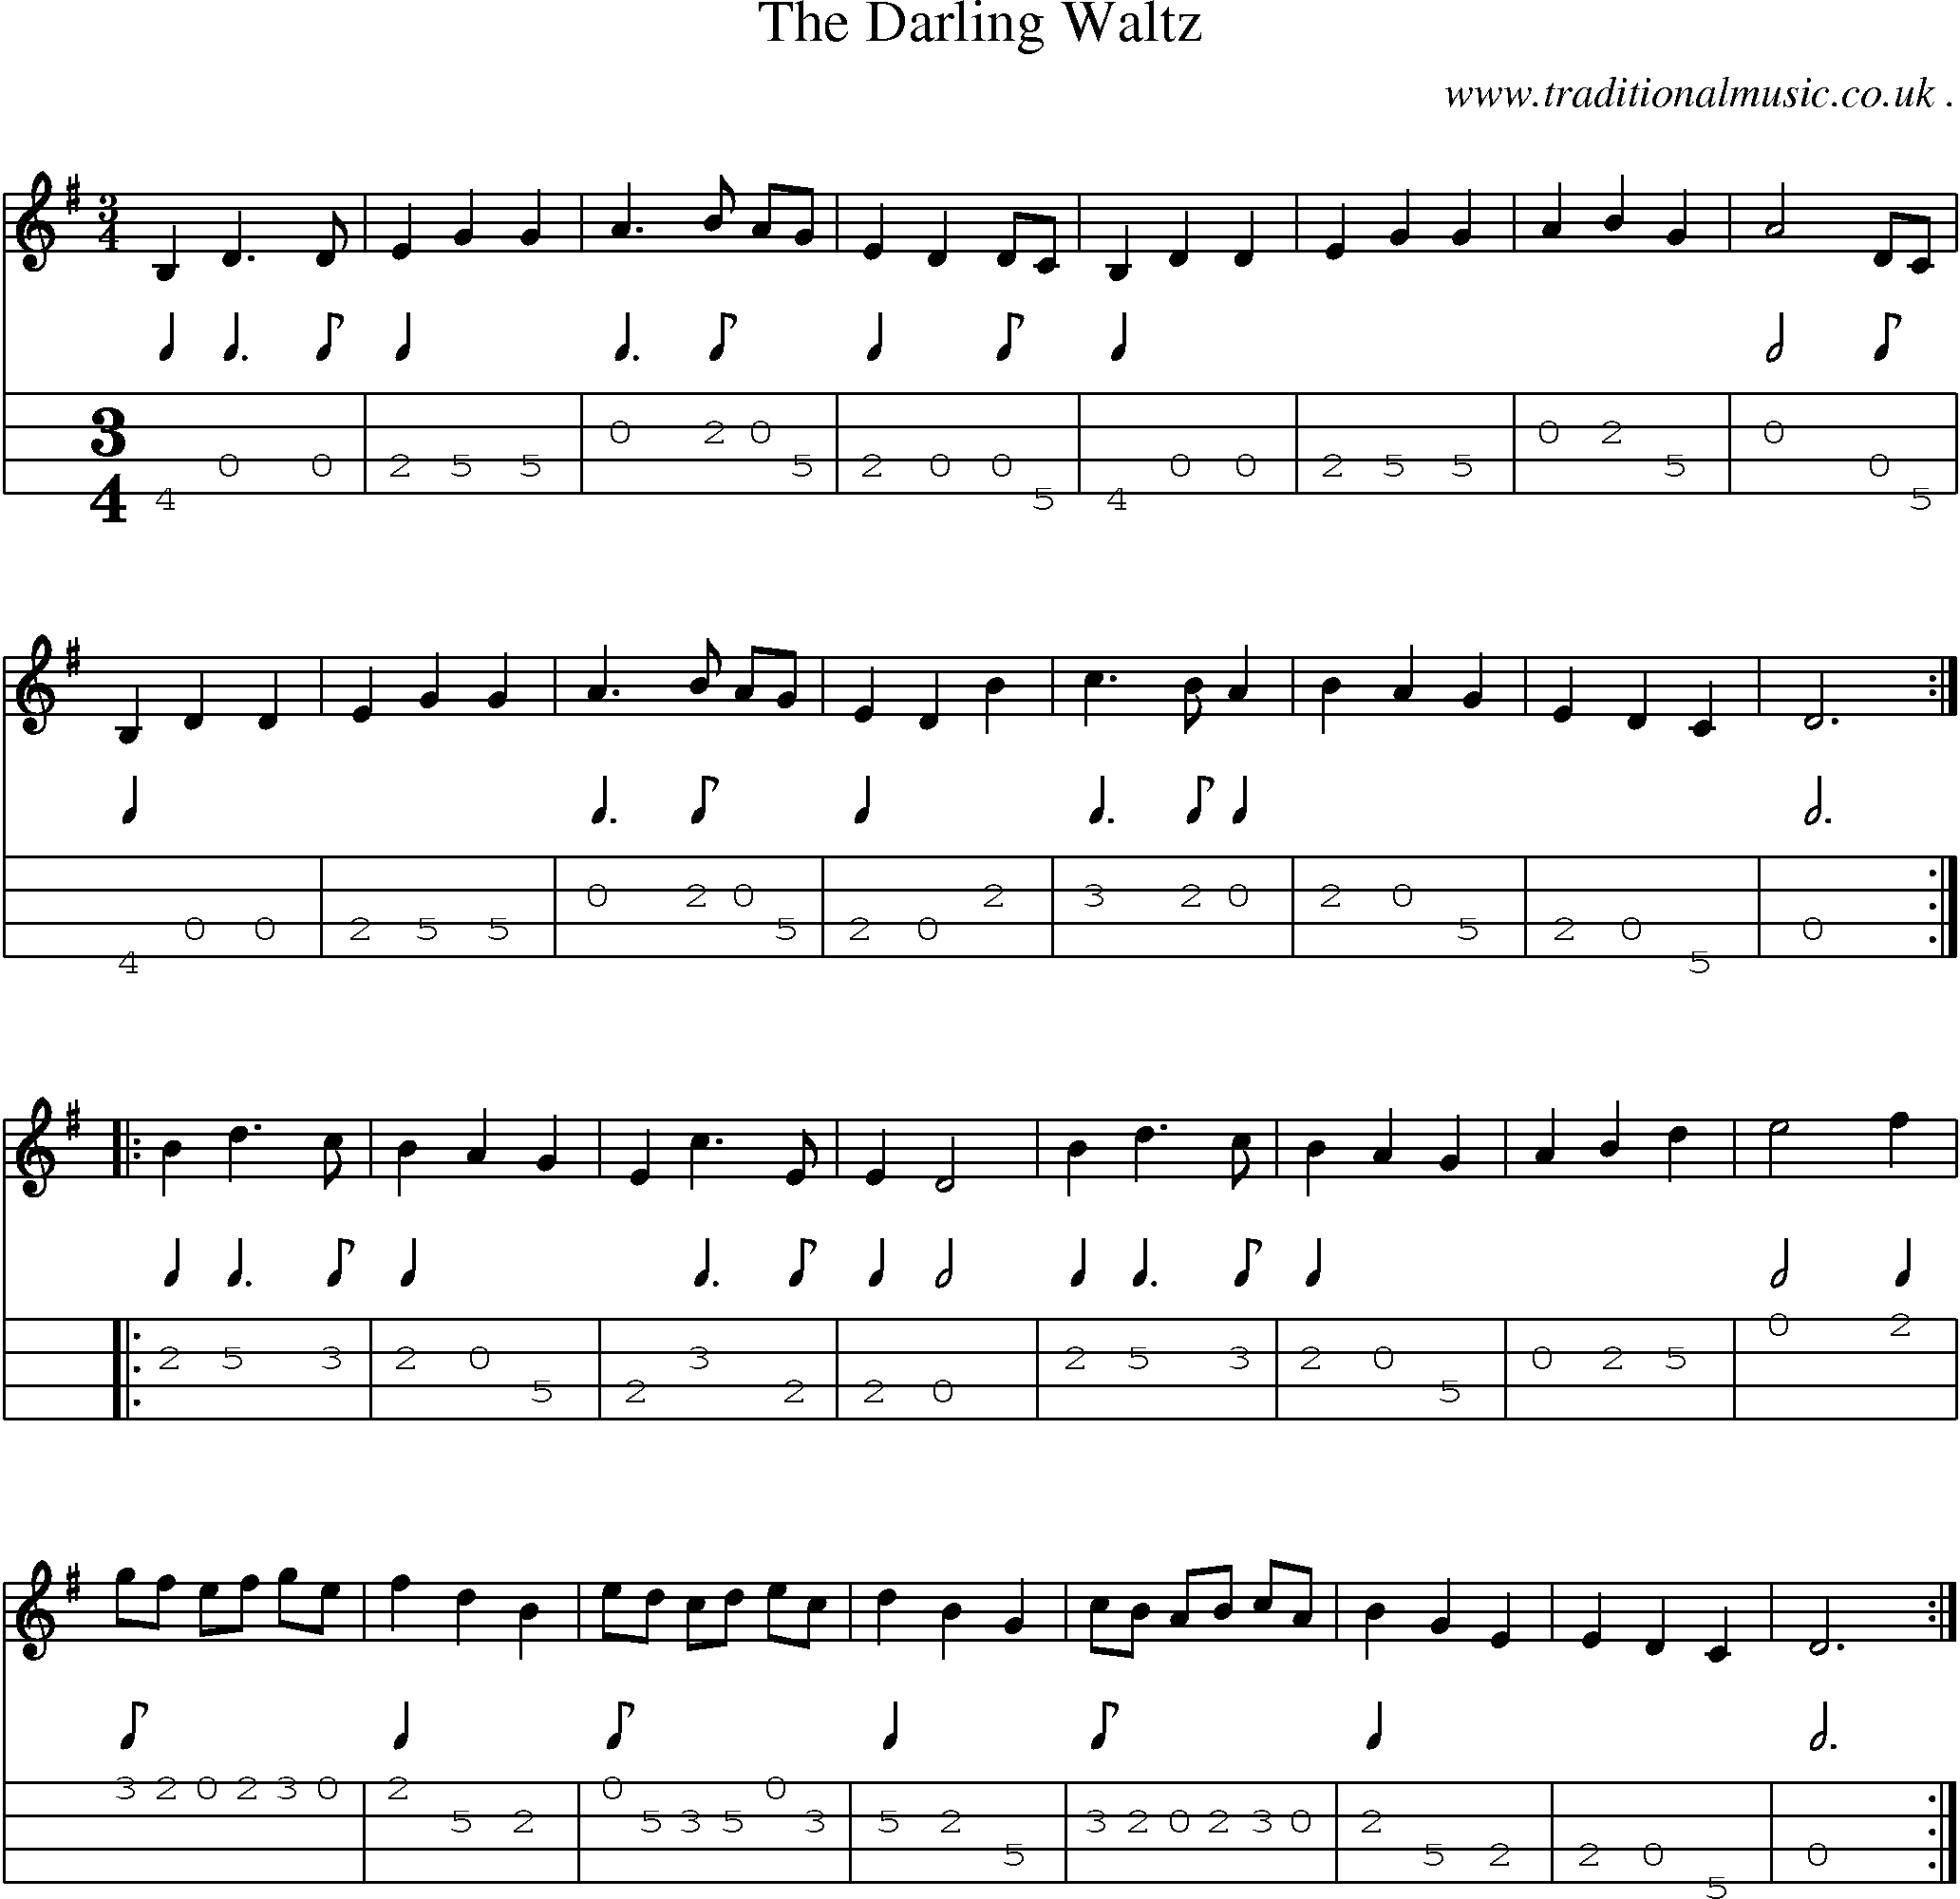 Sheet-Music and Mandolin Tabs for The Darling Waltz